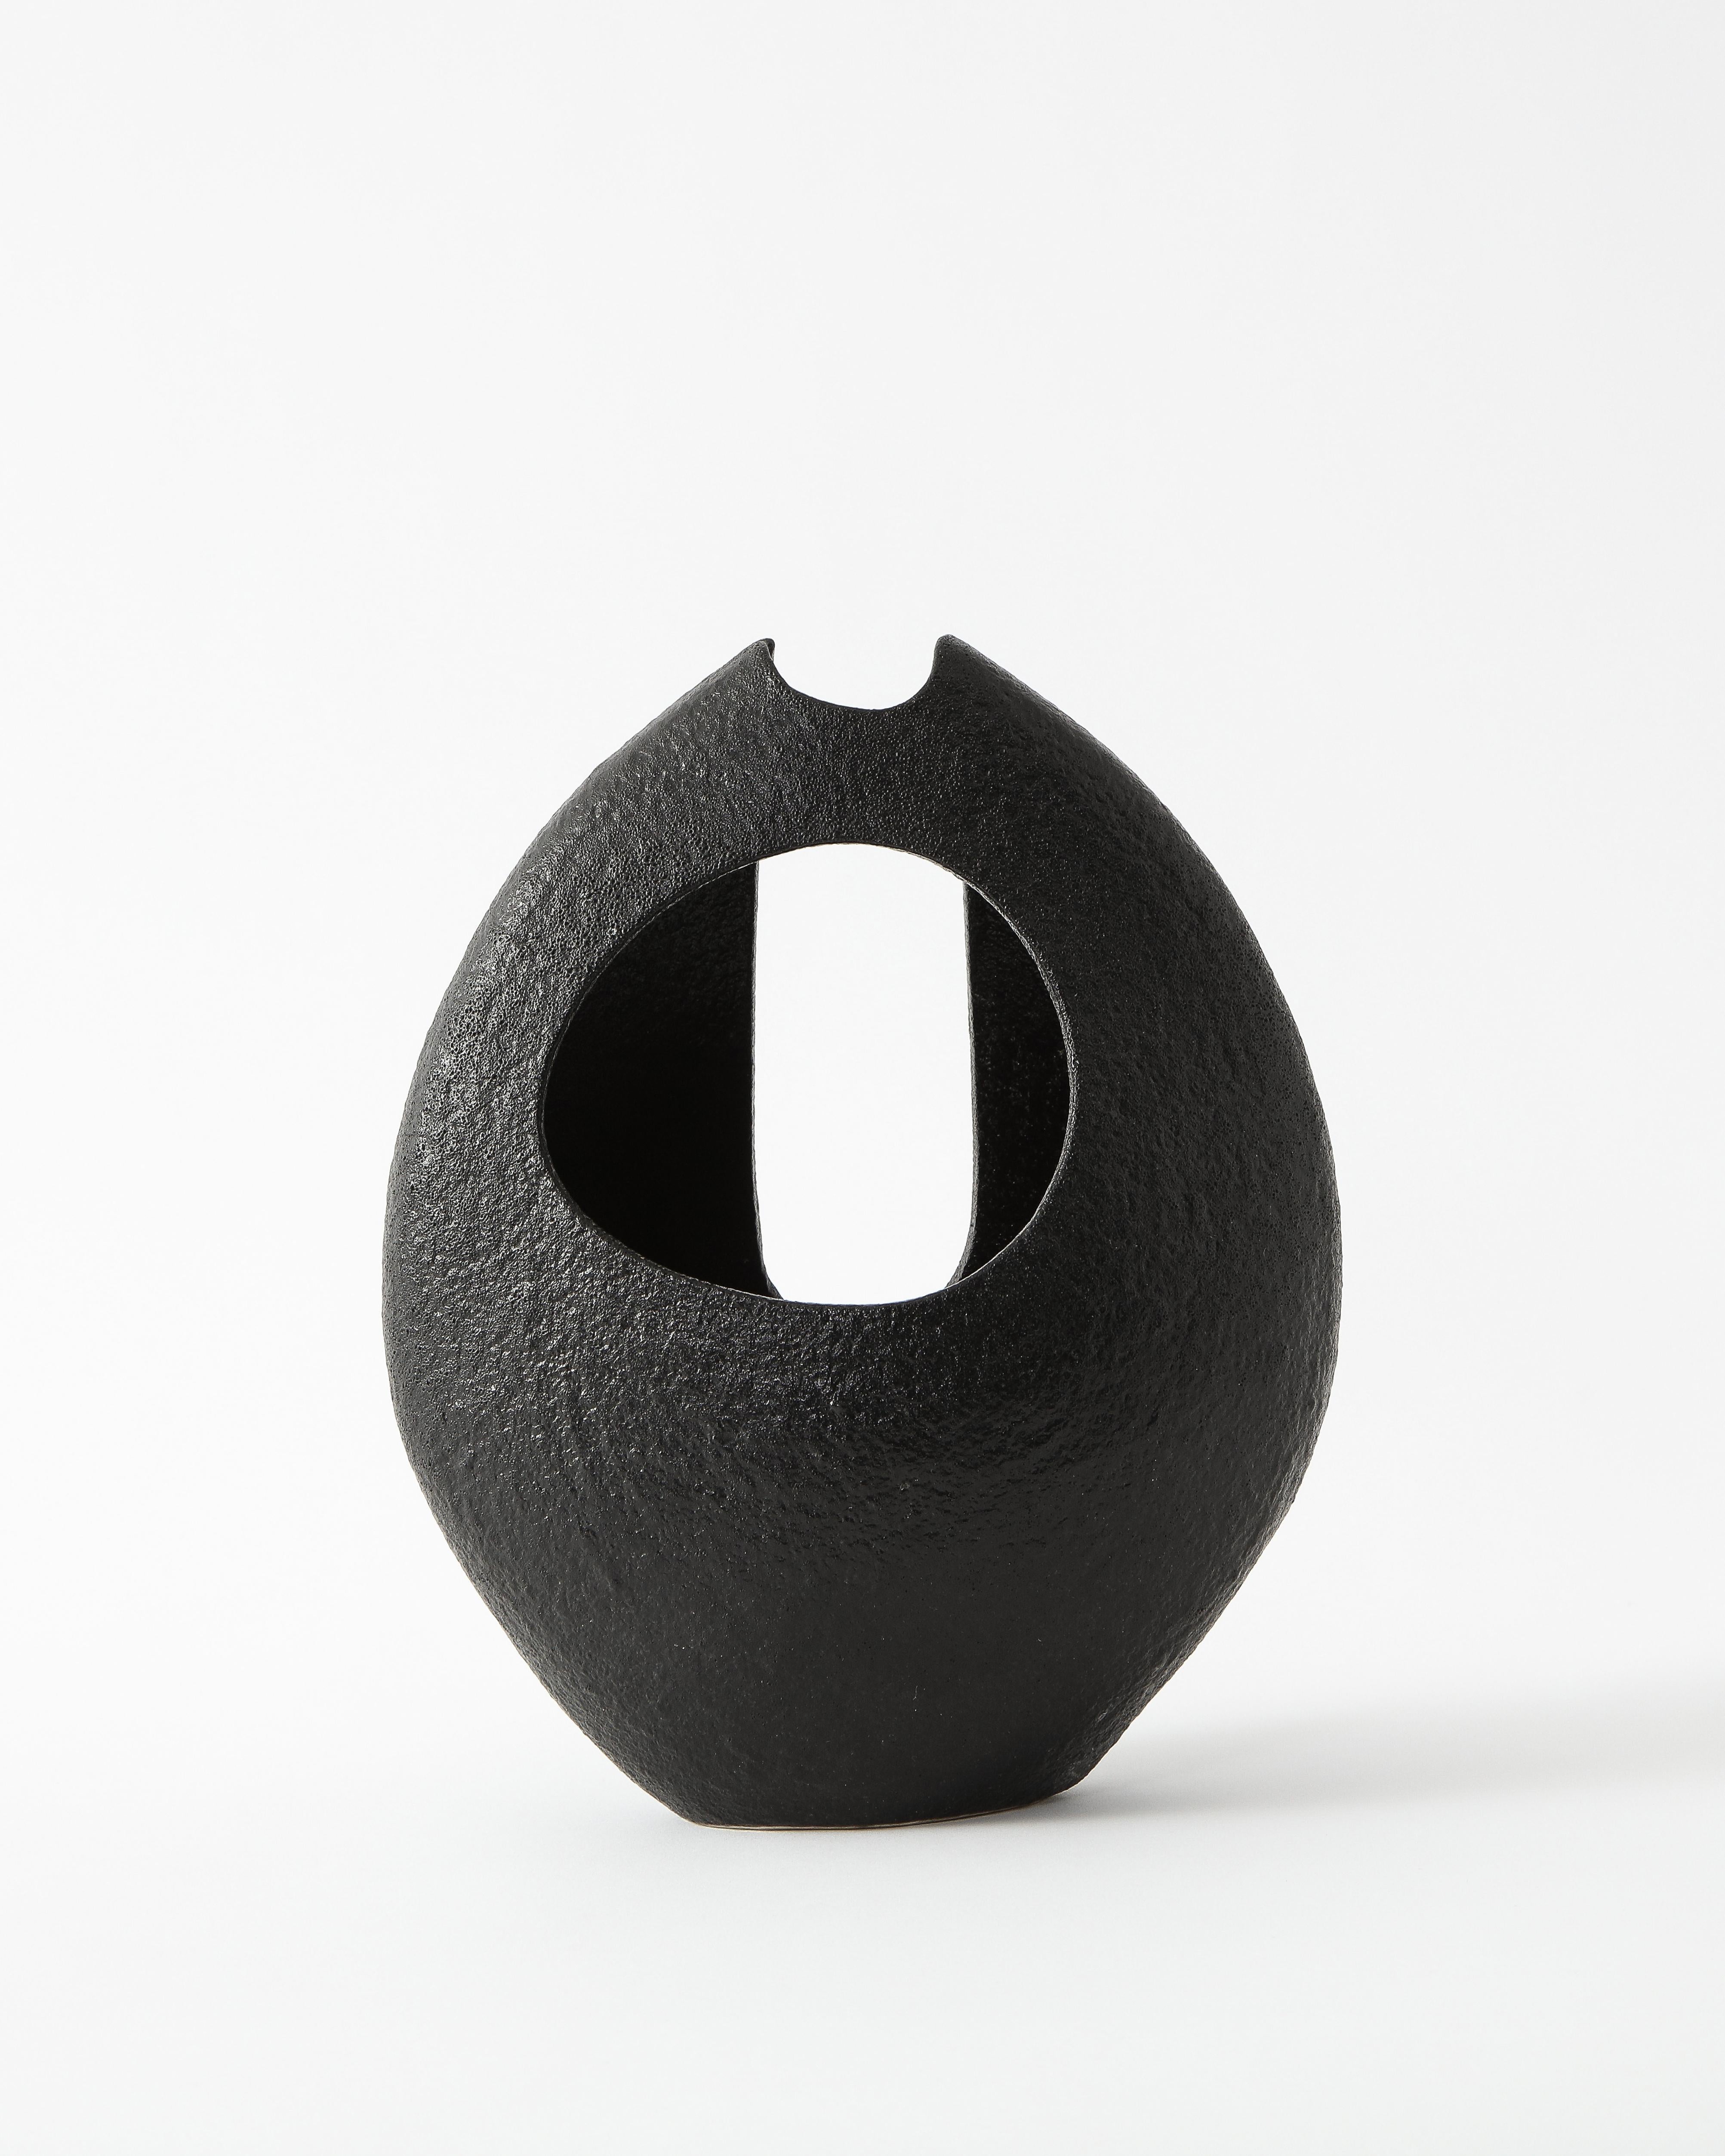 Asymmetrical black Japanese almond-shaped ceramic with a dense, grainy texture. One side features a circular hole while the other has an oblong opening that stretches up to the very top.